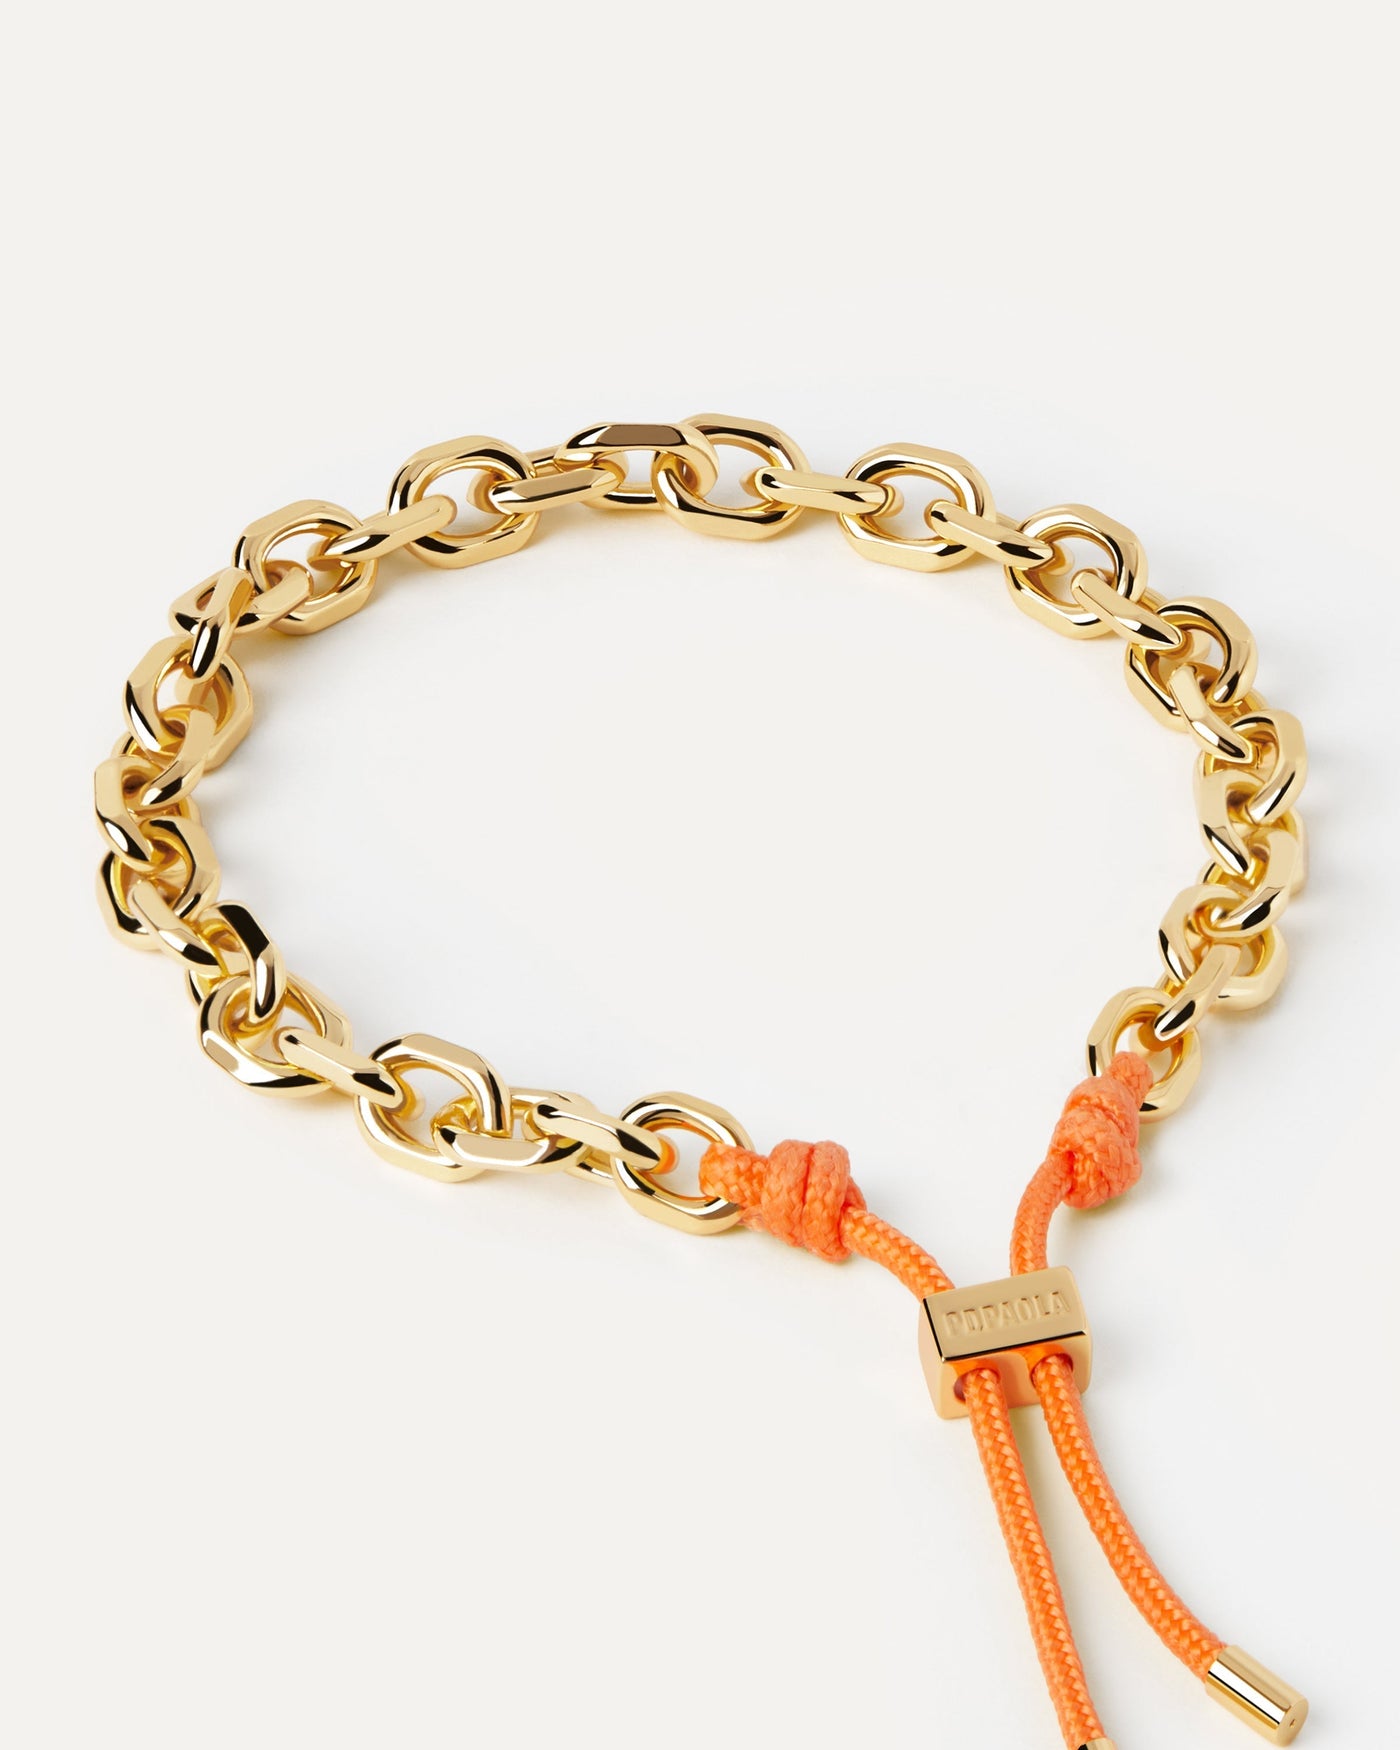 2023 Selection | Tangerine Essential Rope and Chain Bracelet. Silver chain bracelet with interwined orange rope and adjustable sliding clasp. Get the latest arrival from PDPAOLA. Place your order safely and get this Best Seller. Free Shipping.